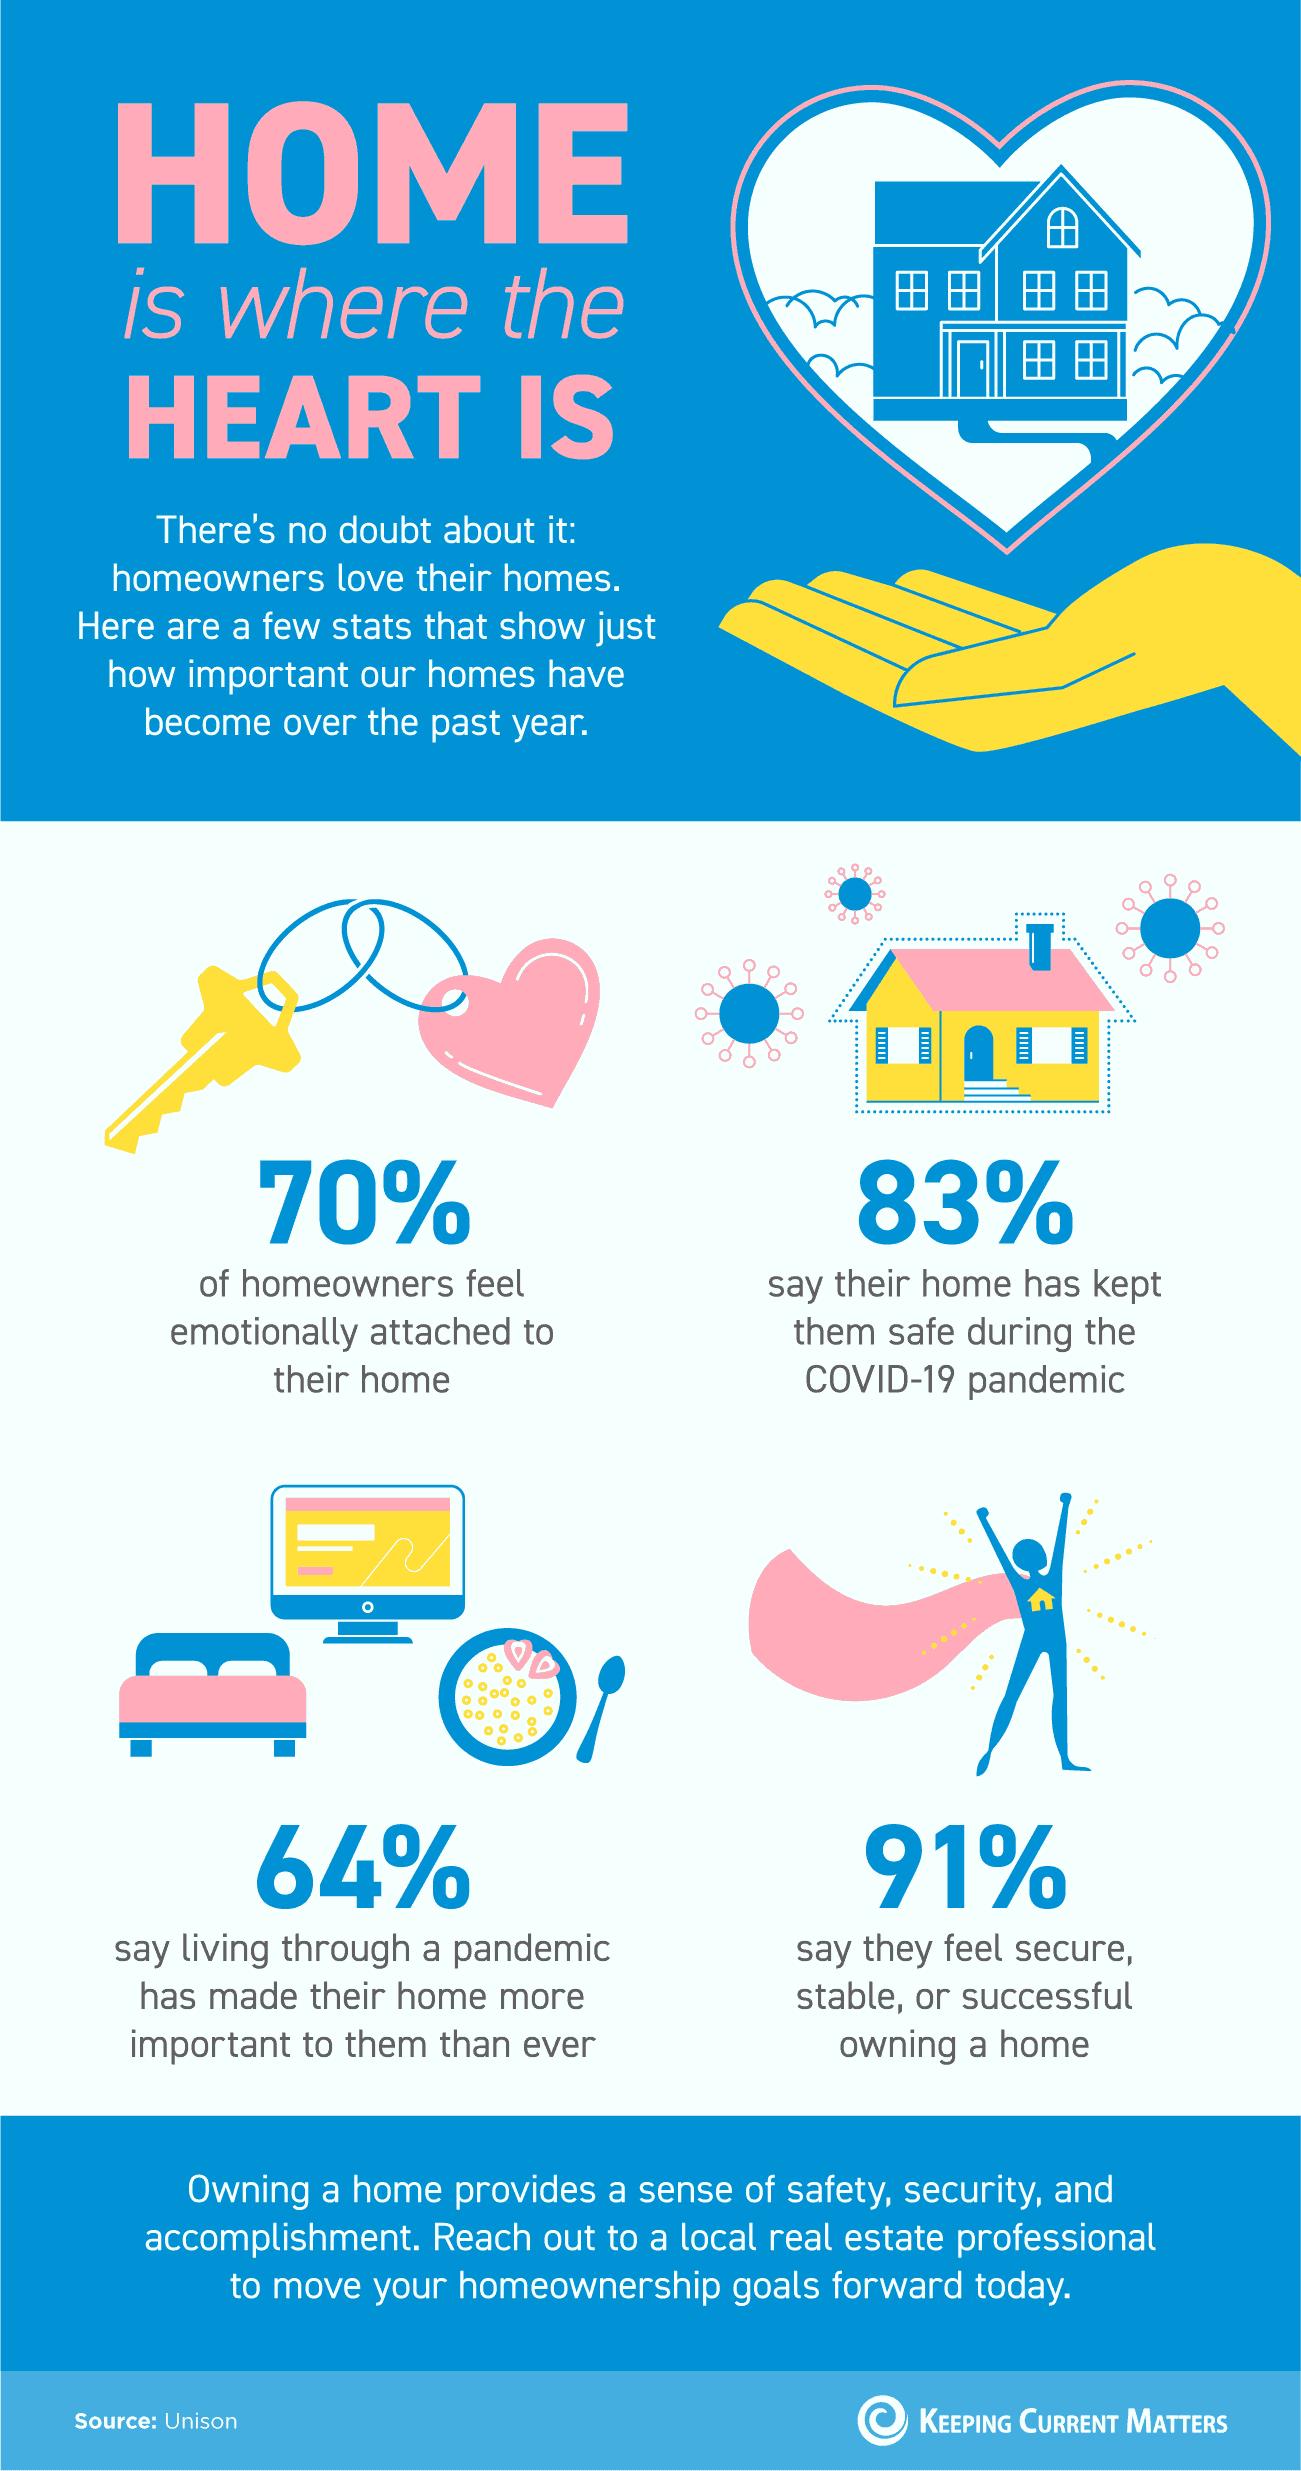 Home Is Where the Heart Is [INFOGRAPHIC] | Keeping Current Matters